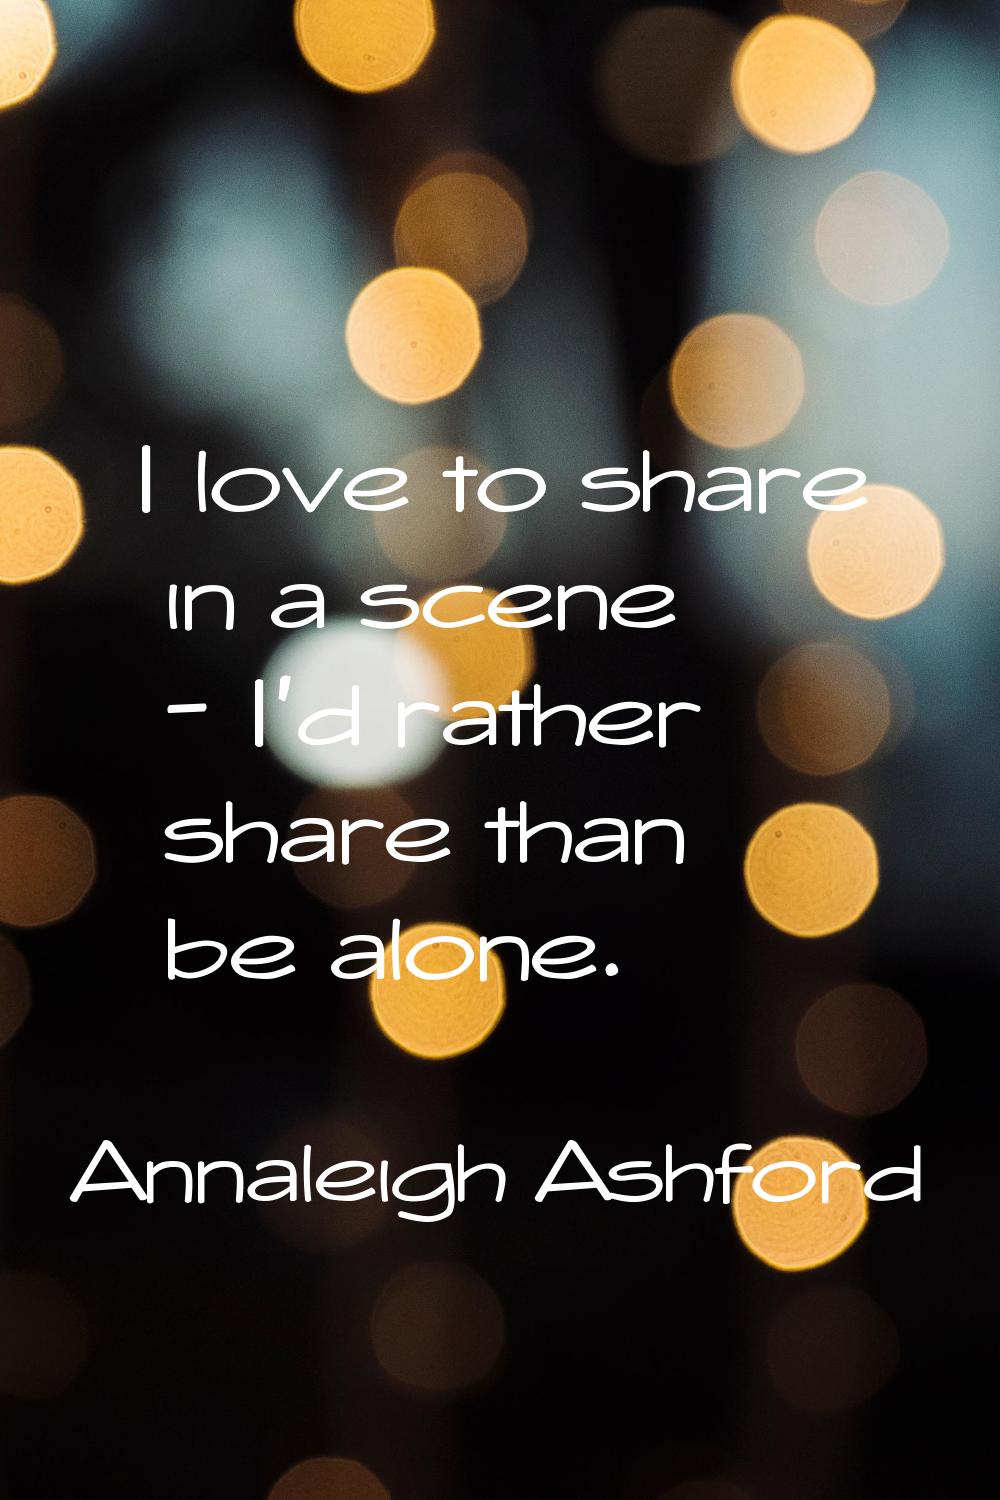 I love to share in a scene - I'd rather share than be alone.